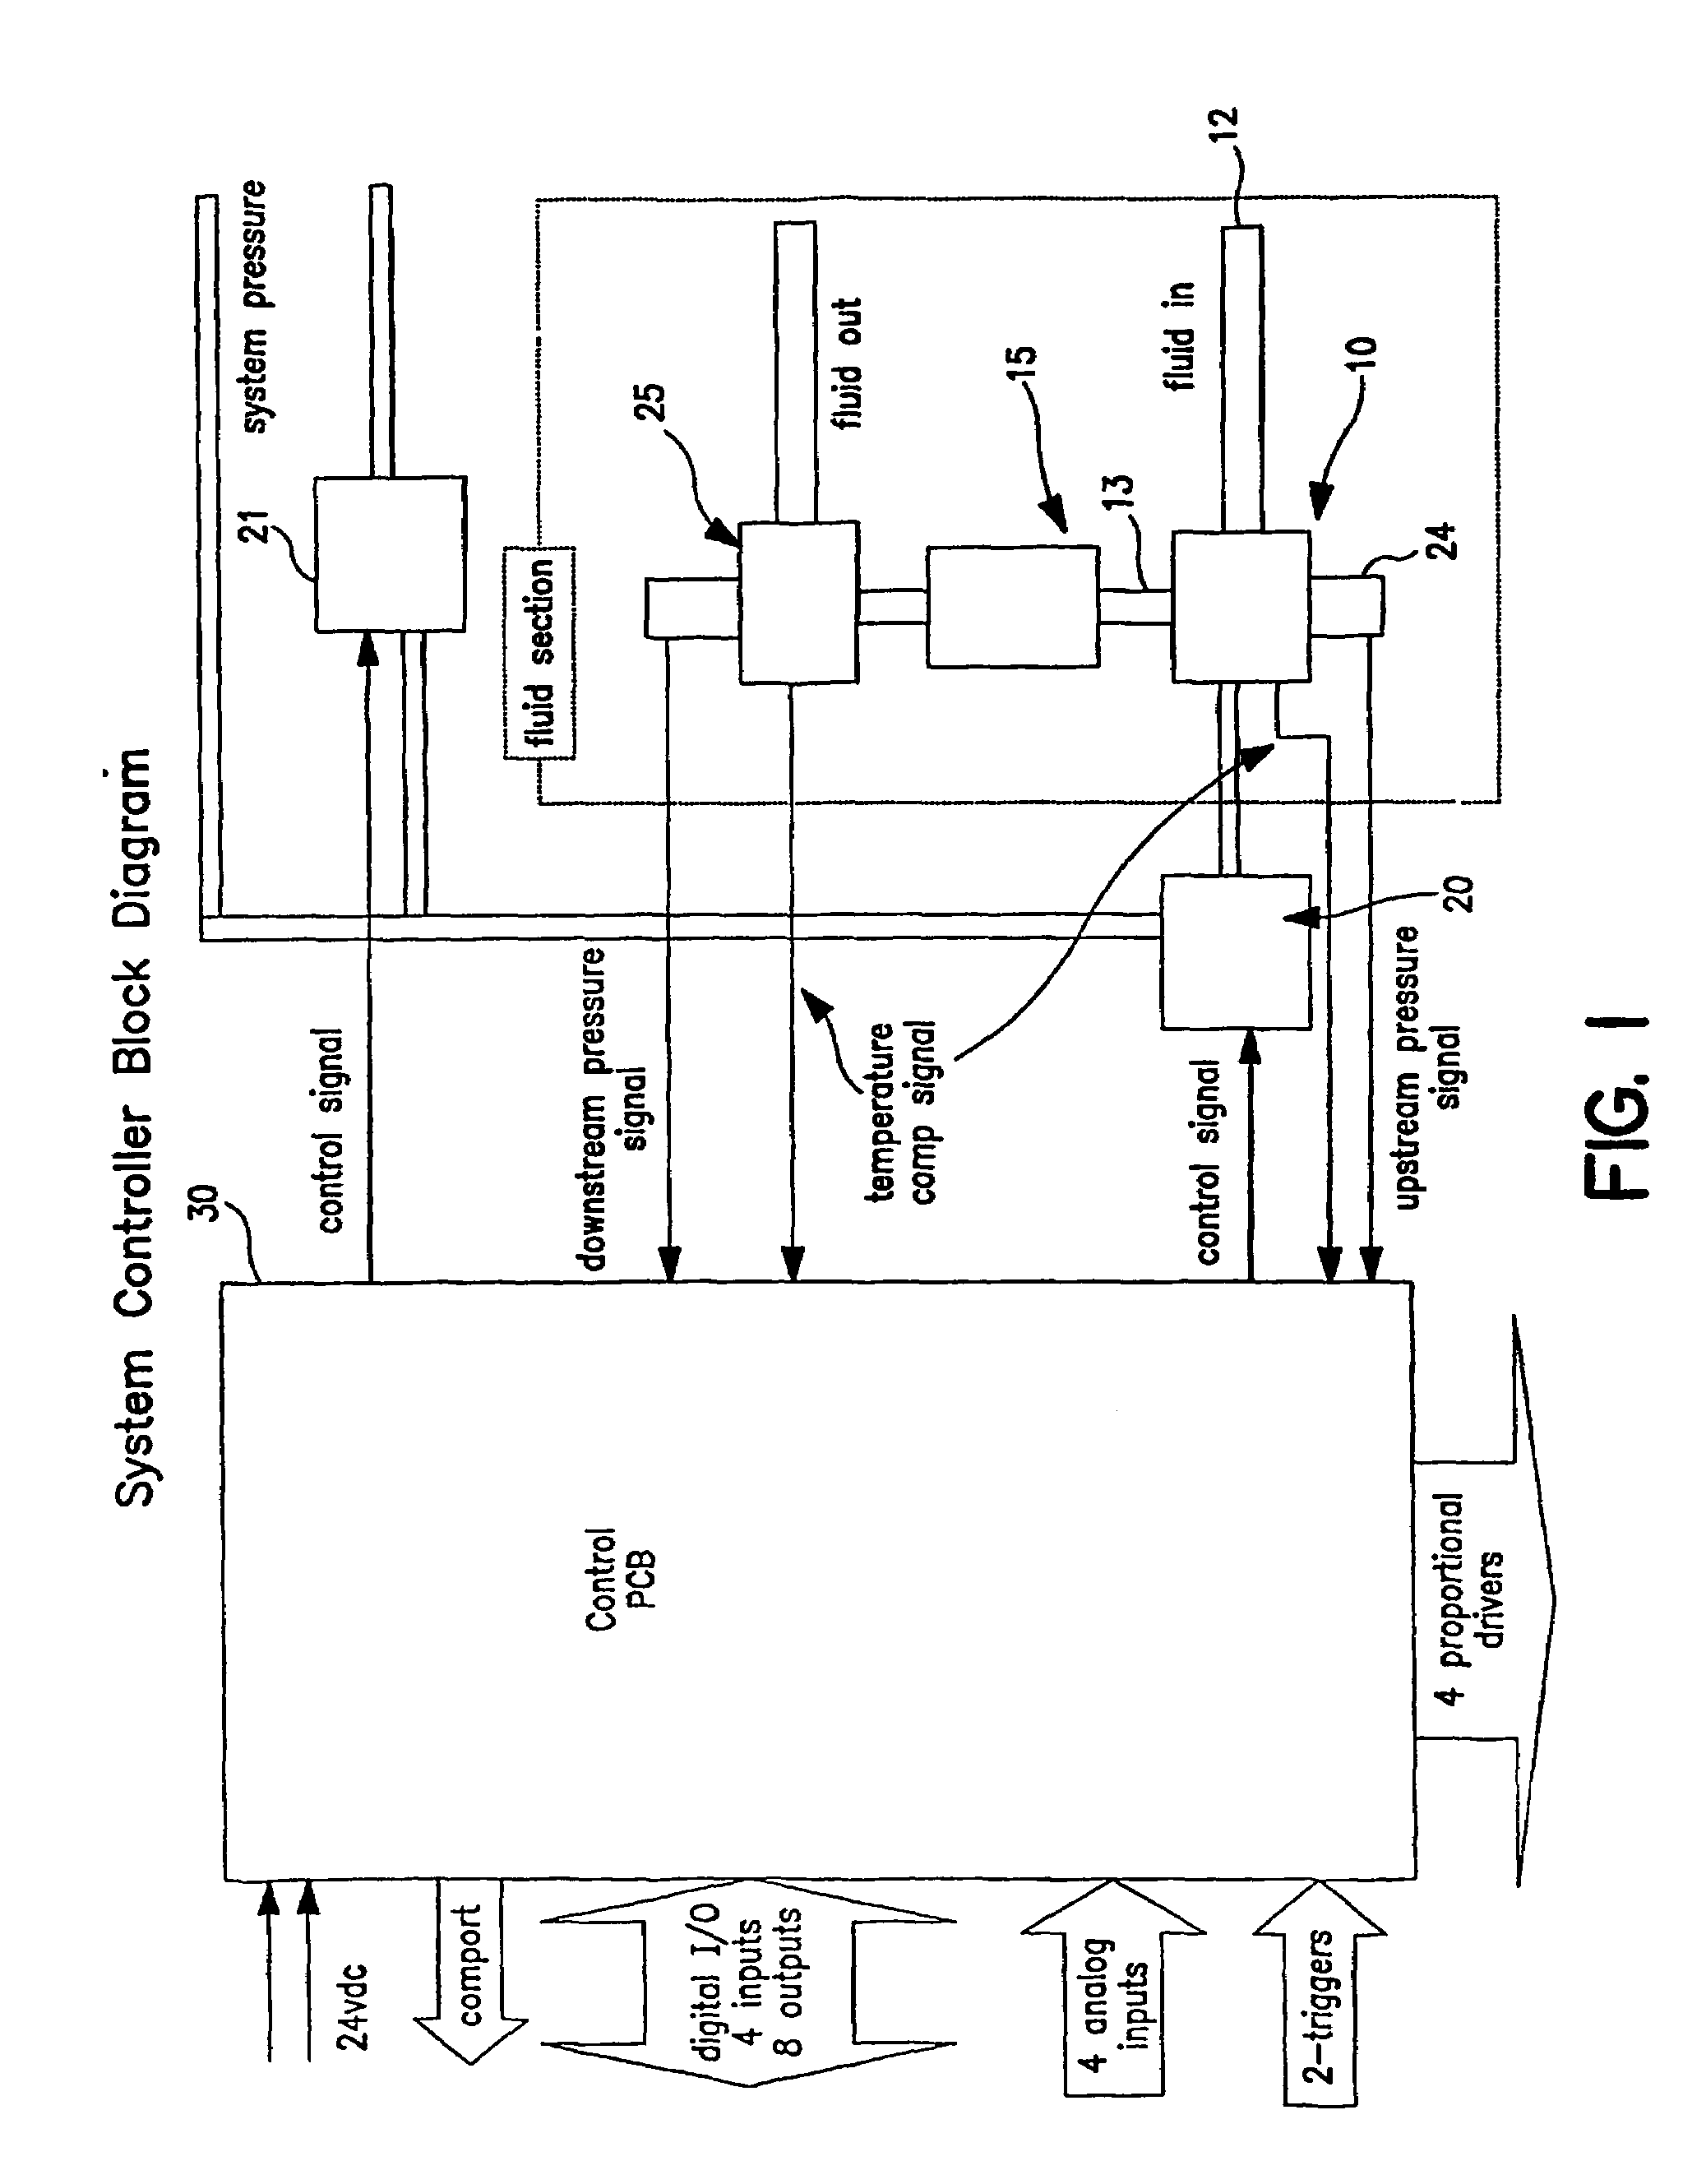 Liquid flow controller and precision dispense apparatus and system